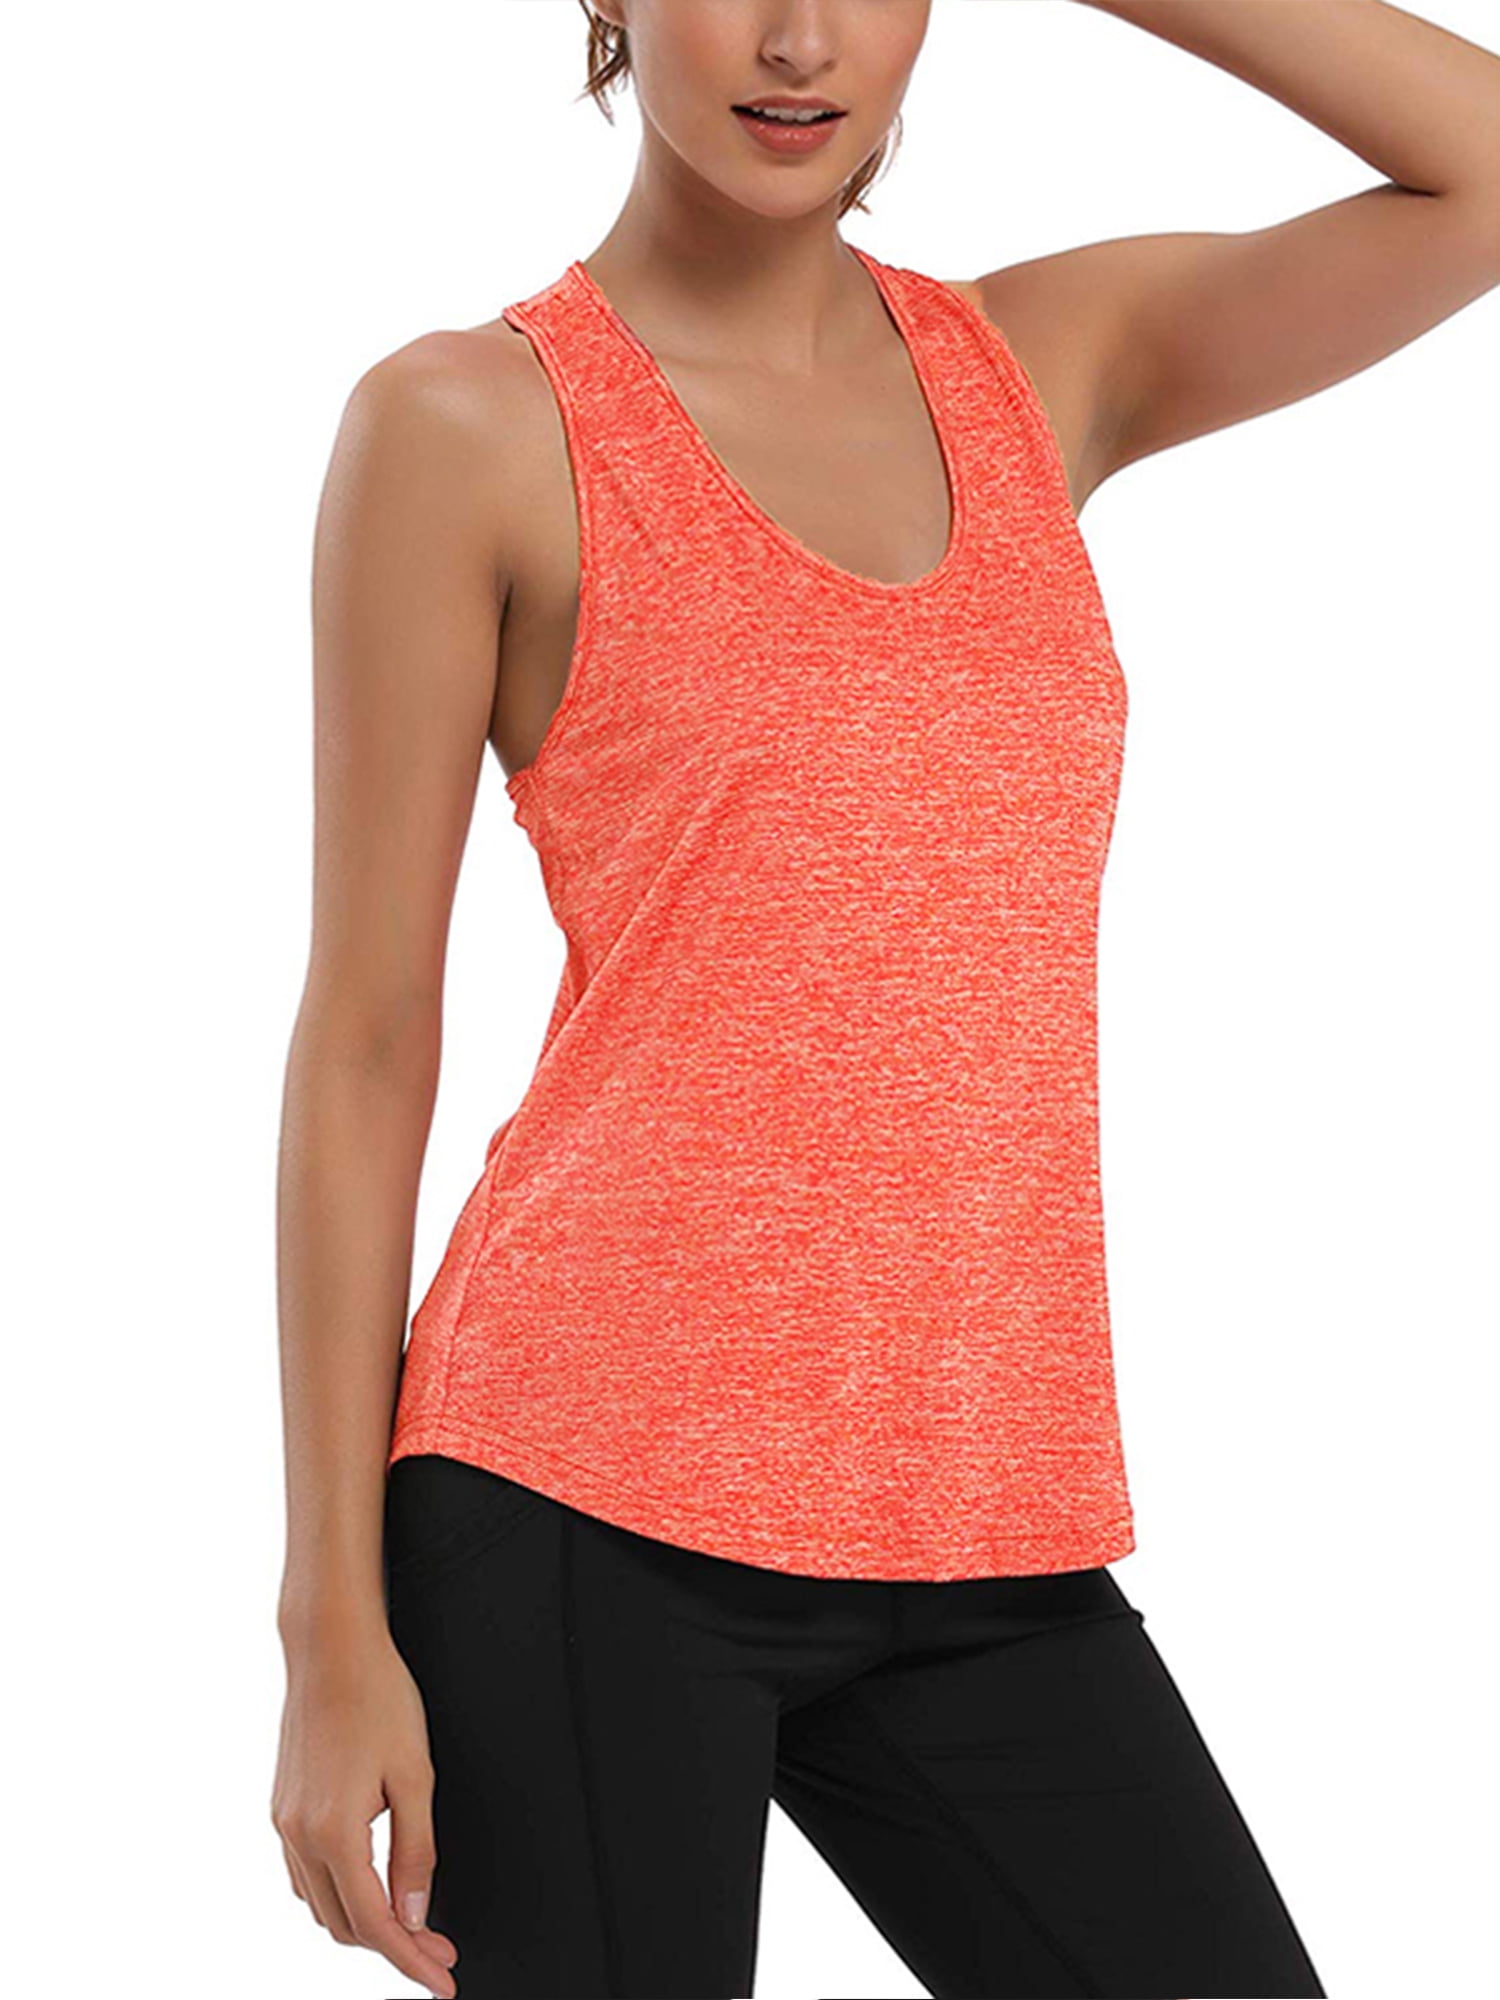 KOJOOIN Workout Tank Tops for Women Open Back Shirts Athletic Yoga Muscle Tank Loose Fitting Gym Tops